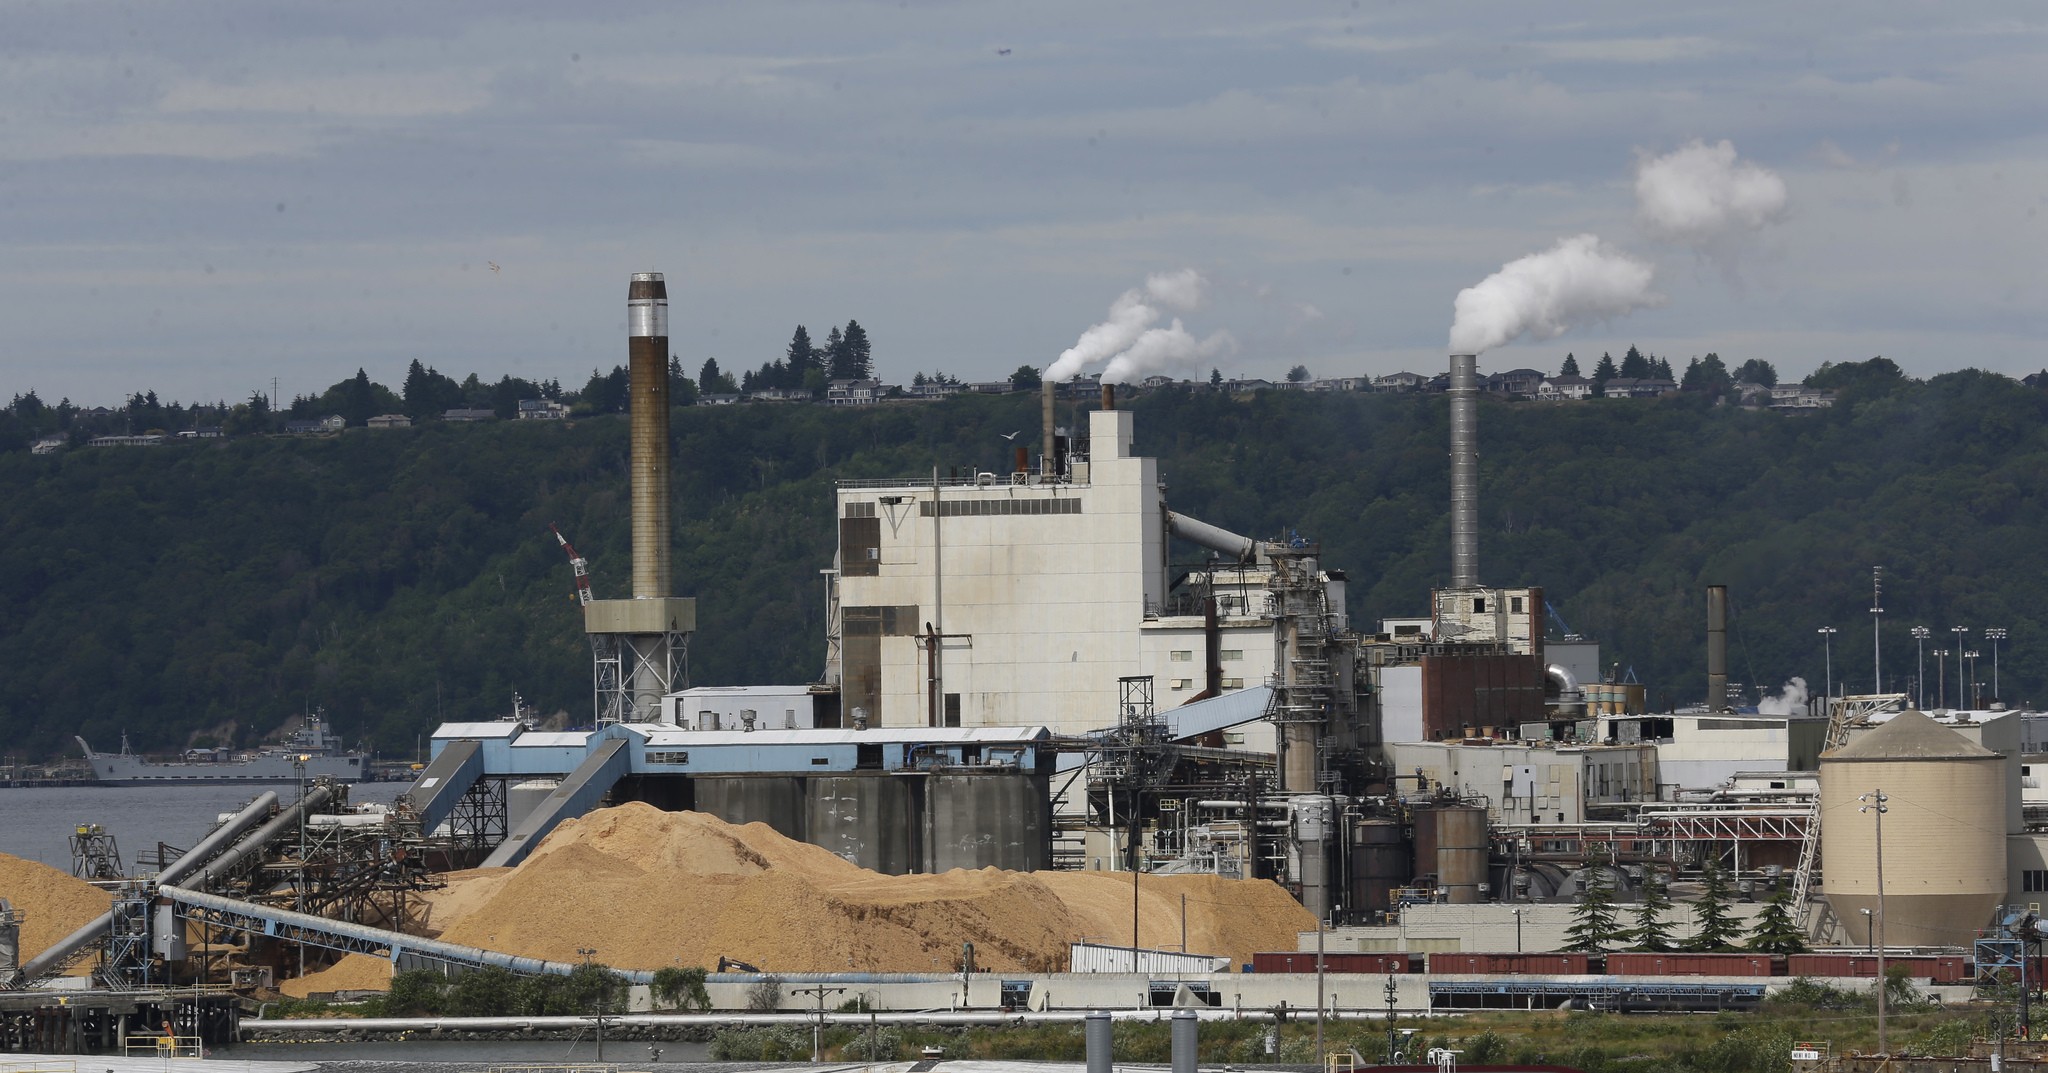 In this June 1 photo, piles of wood chips sit near the RockTenn paper mill in Tacoma. (Ted S. Warren/The Associated Press)